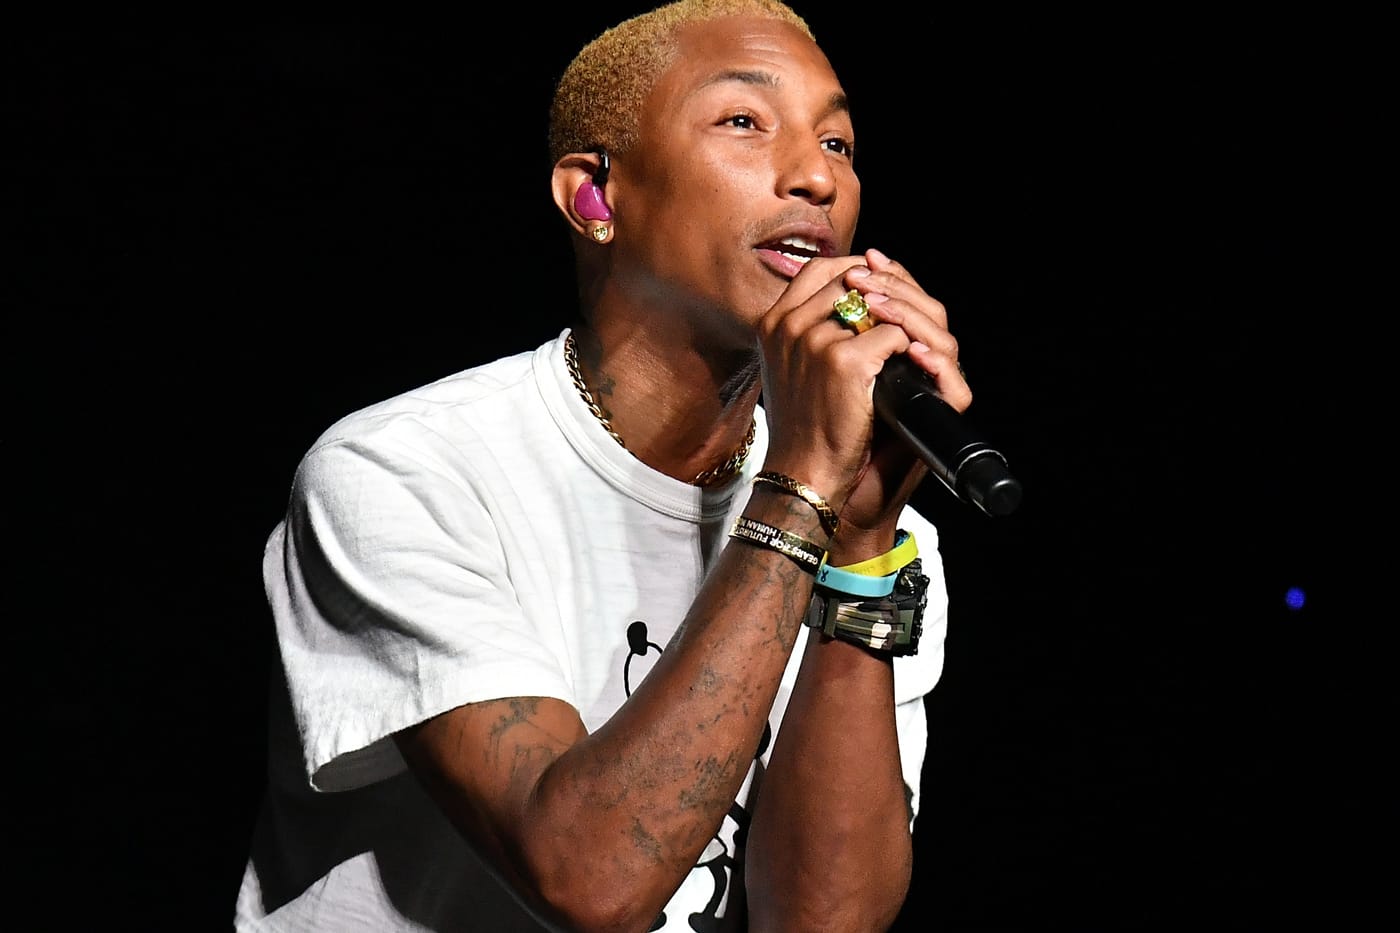 pharrell in the water